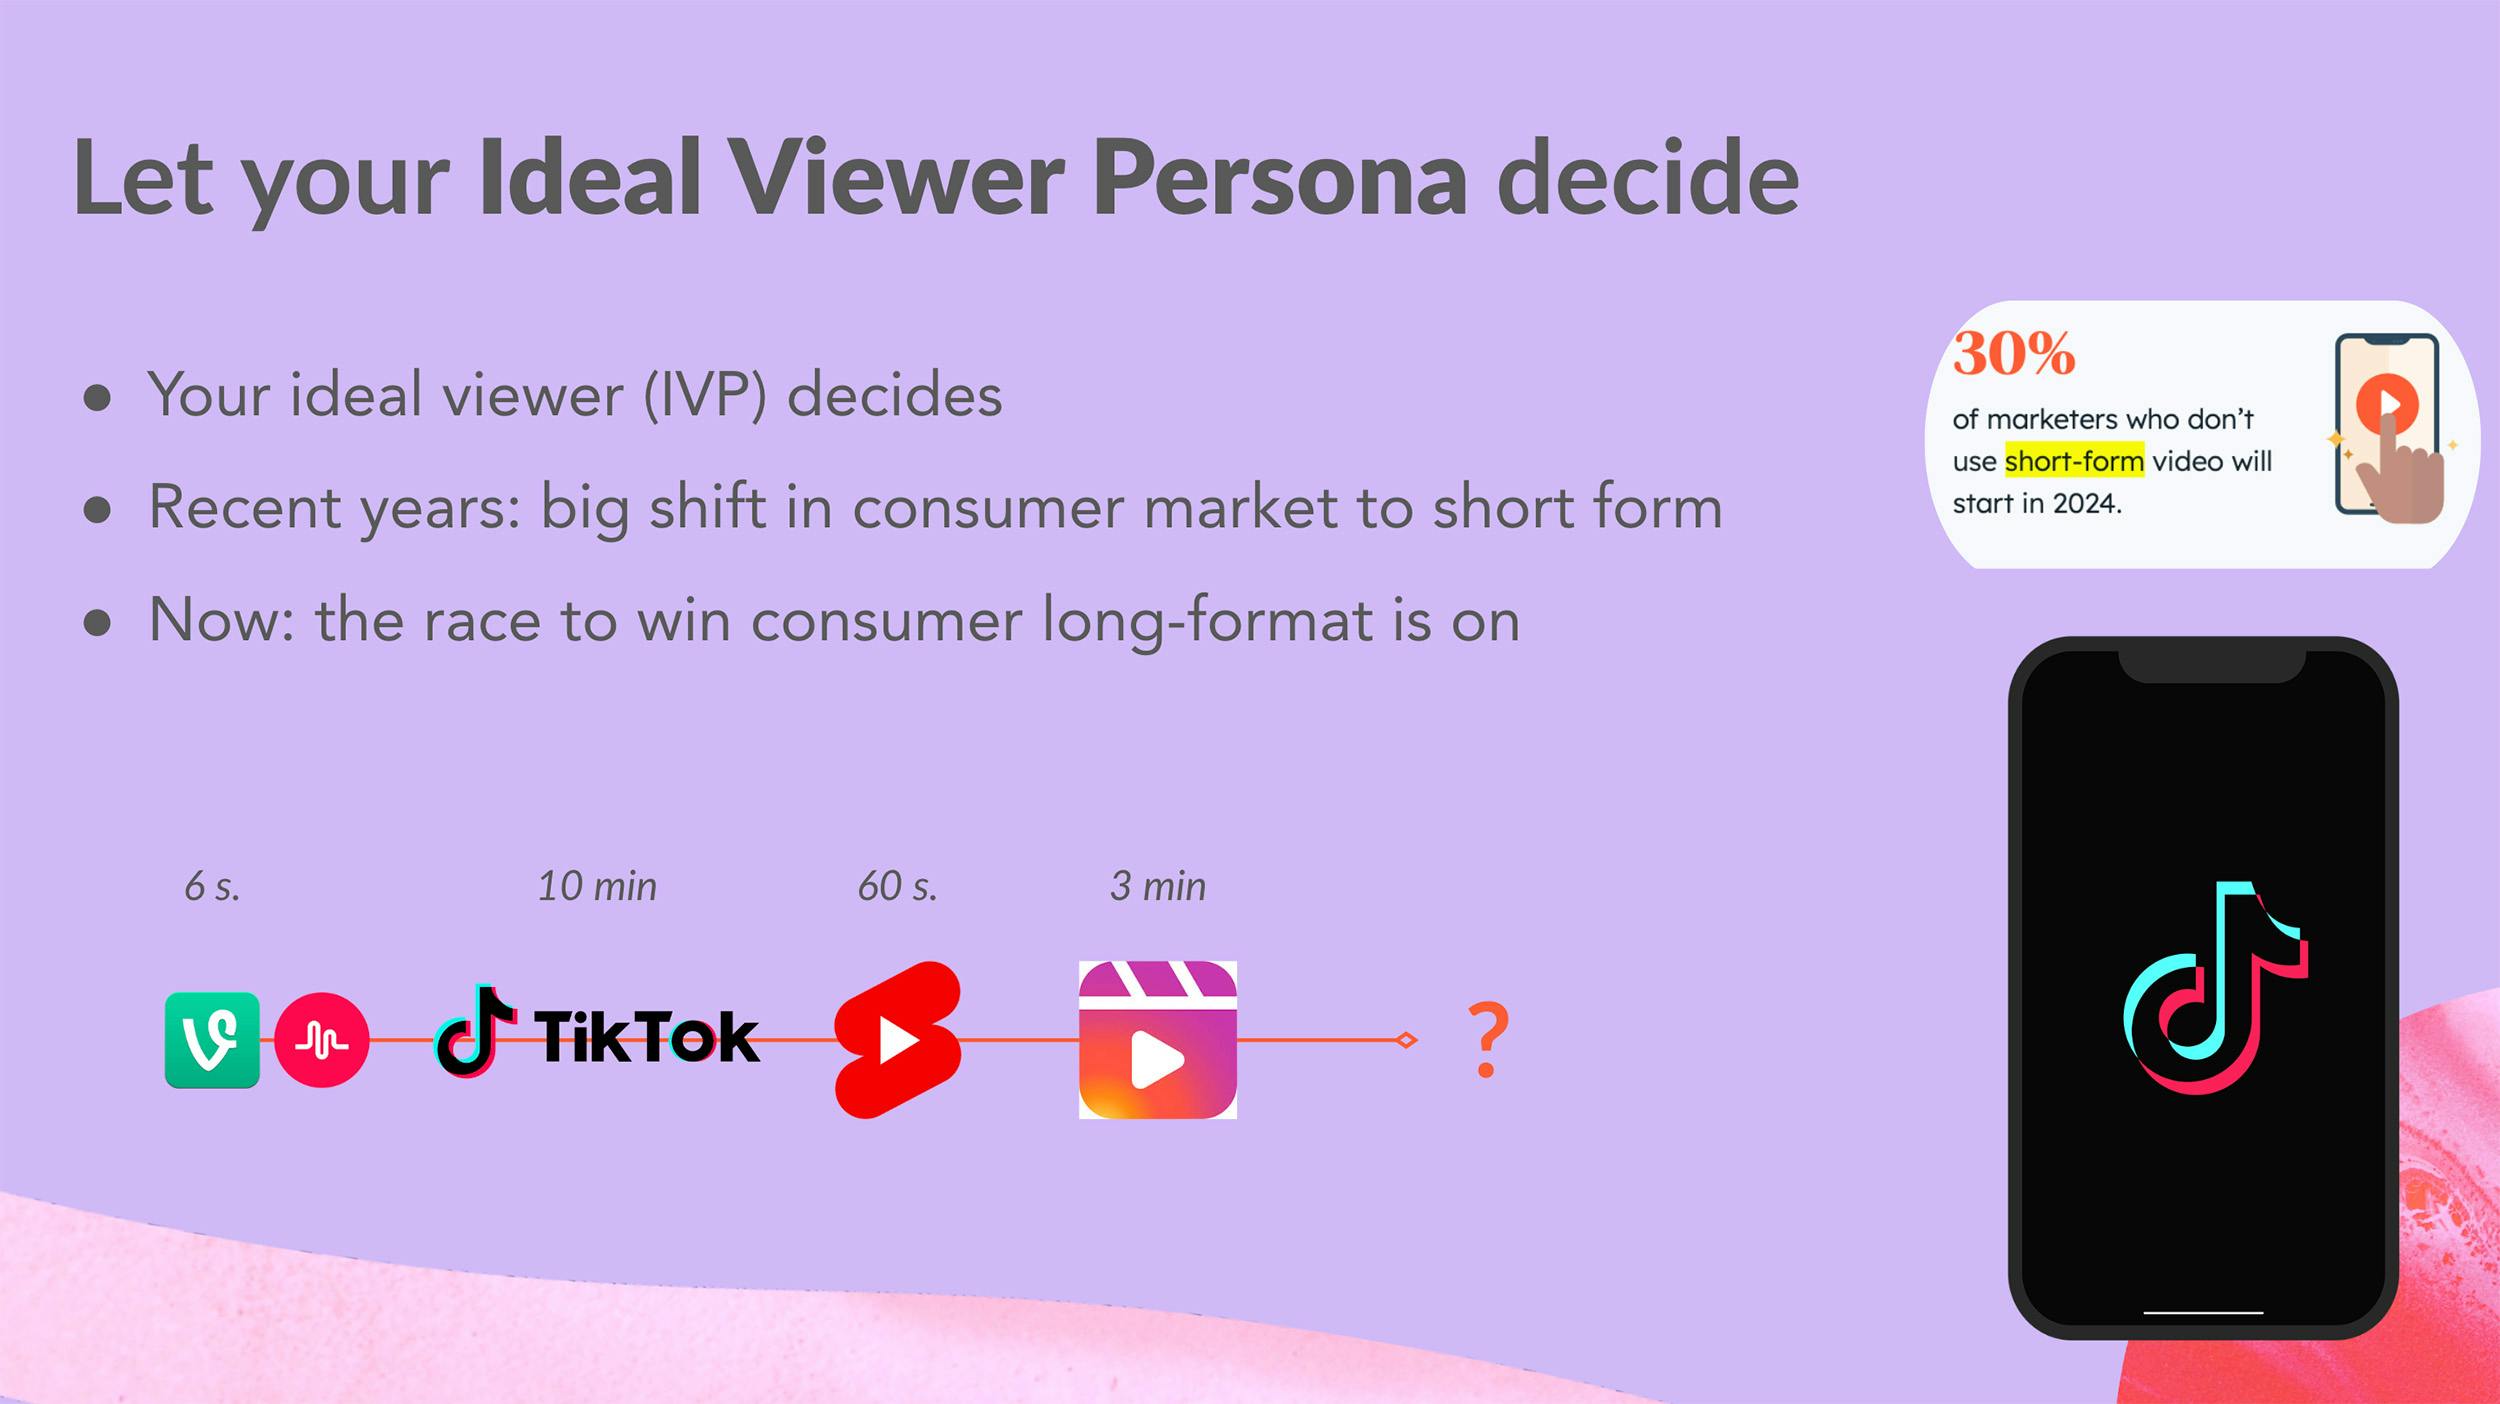 Lead your ideal viewer decide - Video marketing